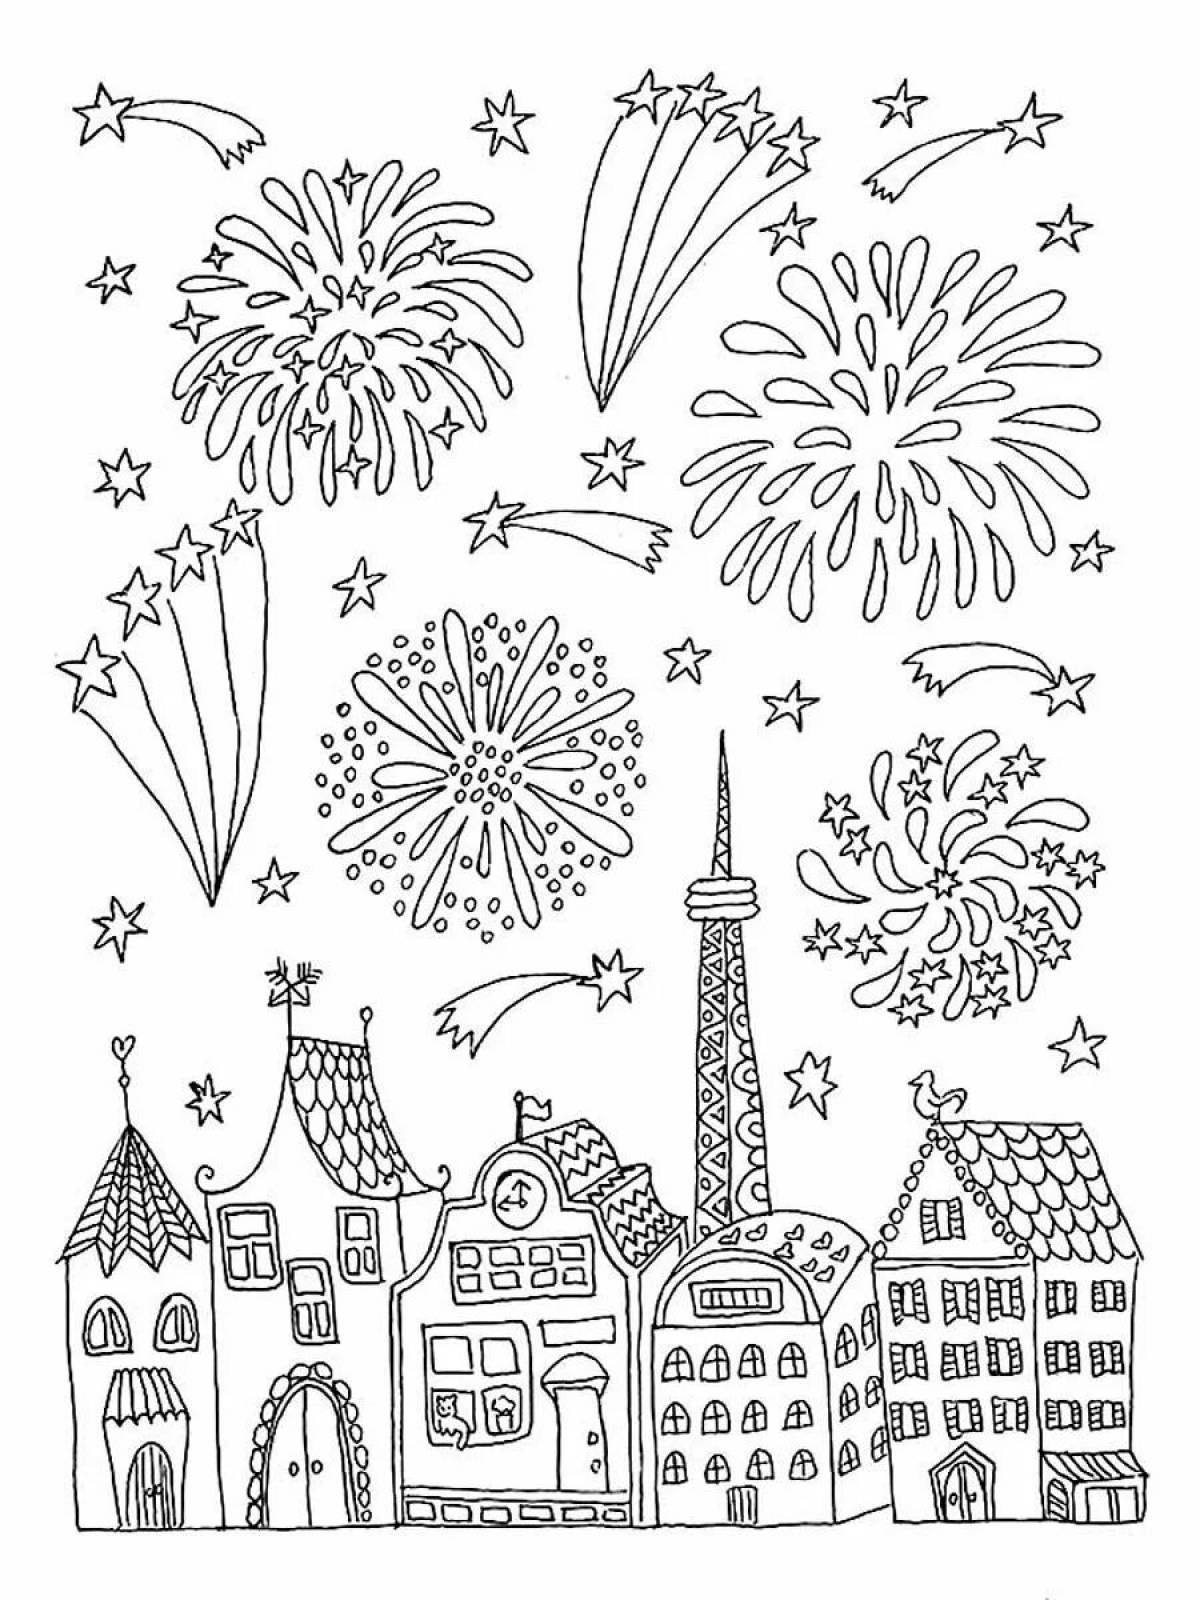 Color-outstanding salute coloring page для детей 3-4 лет